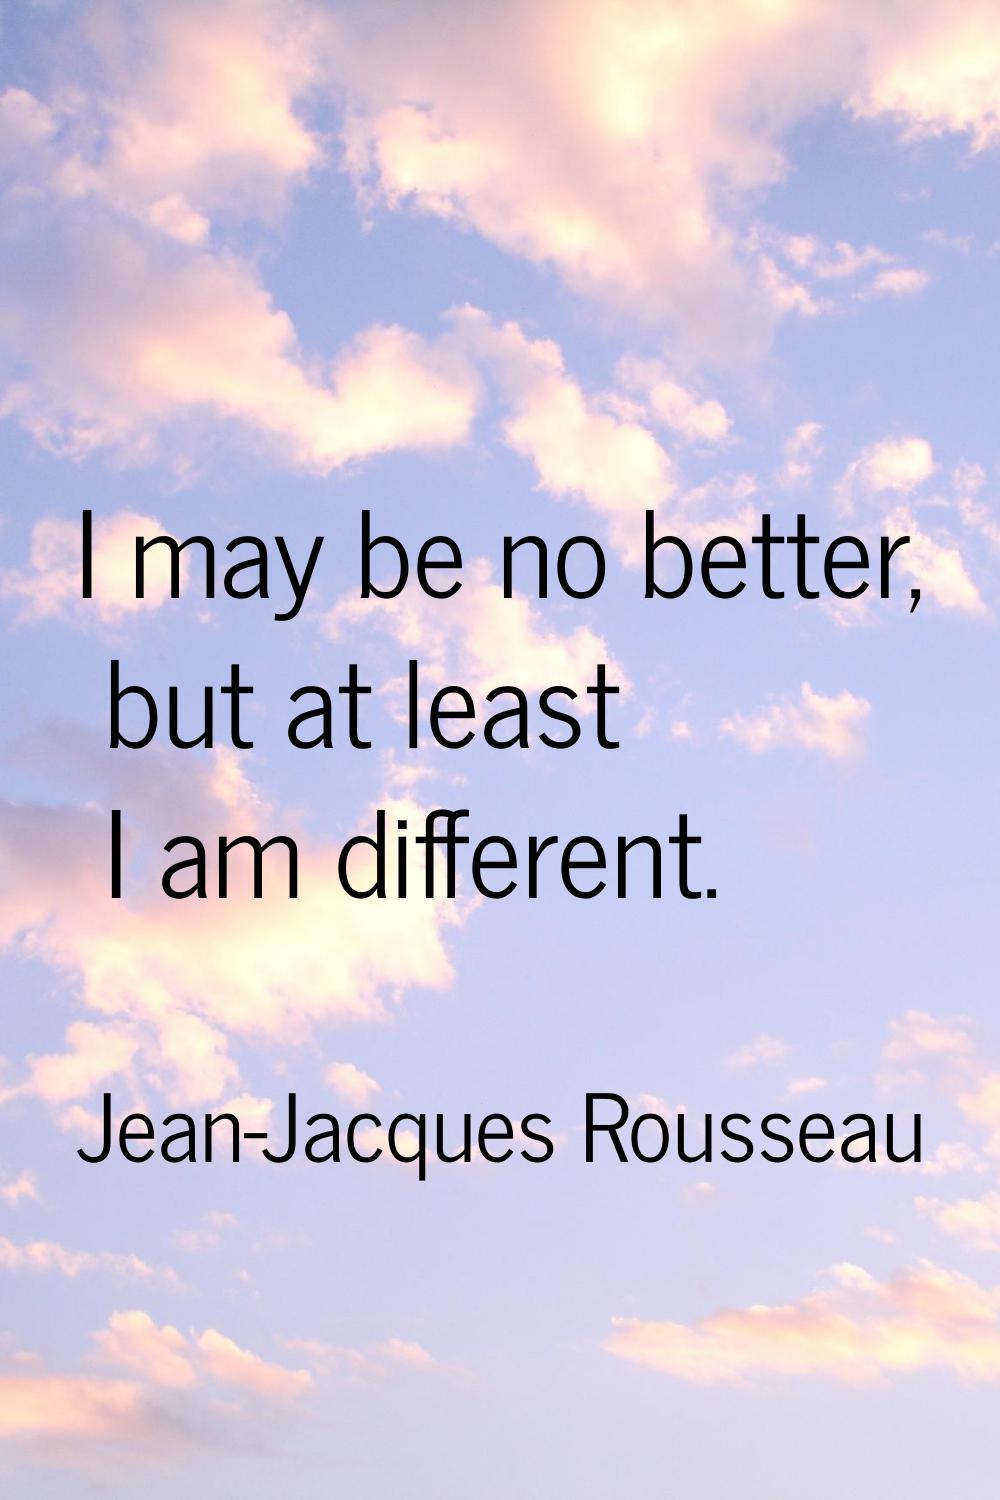 I may be no better, but at least I am different.